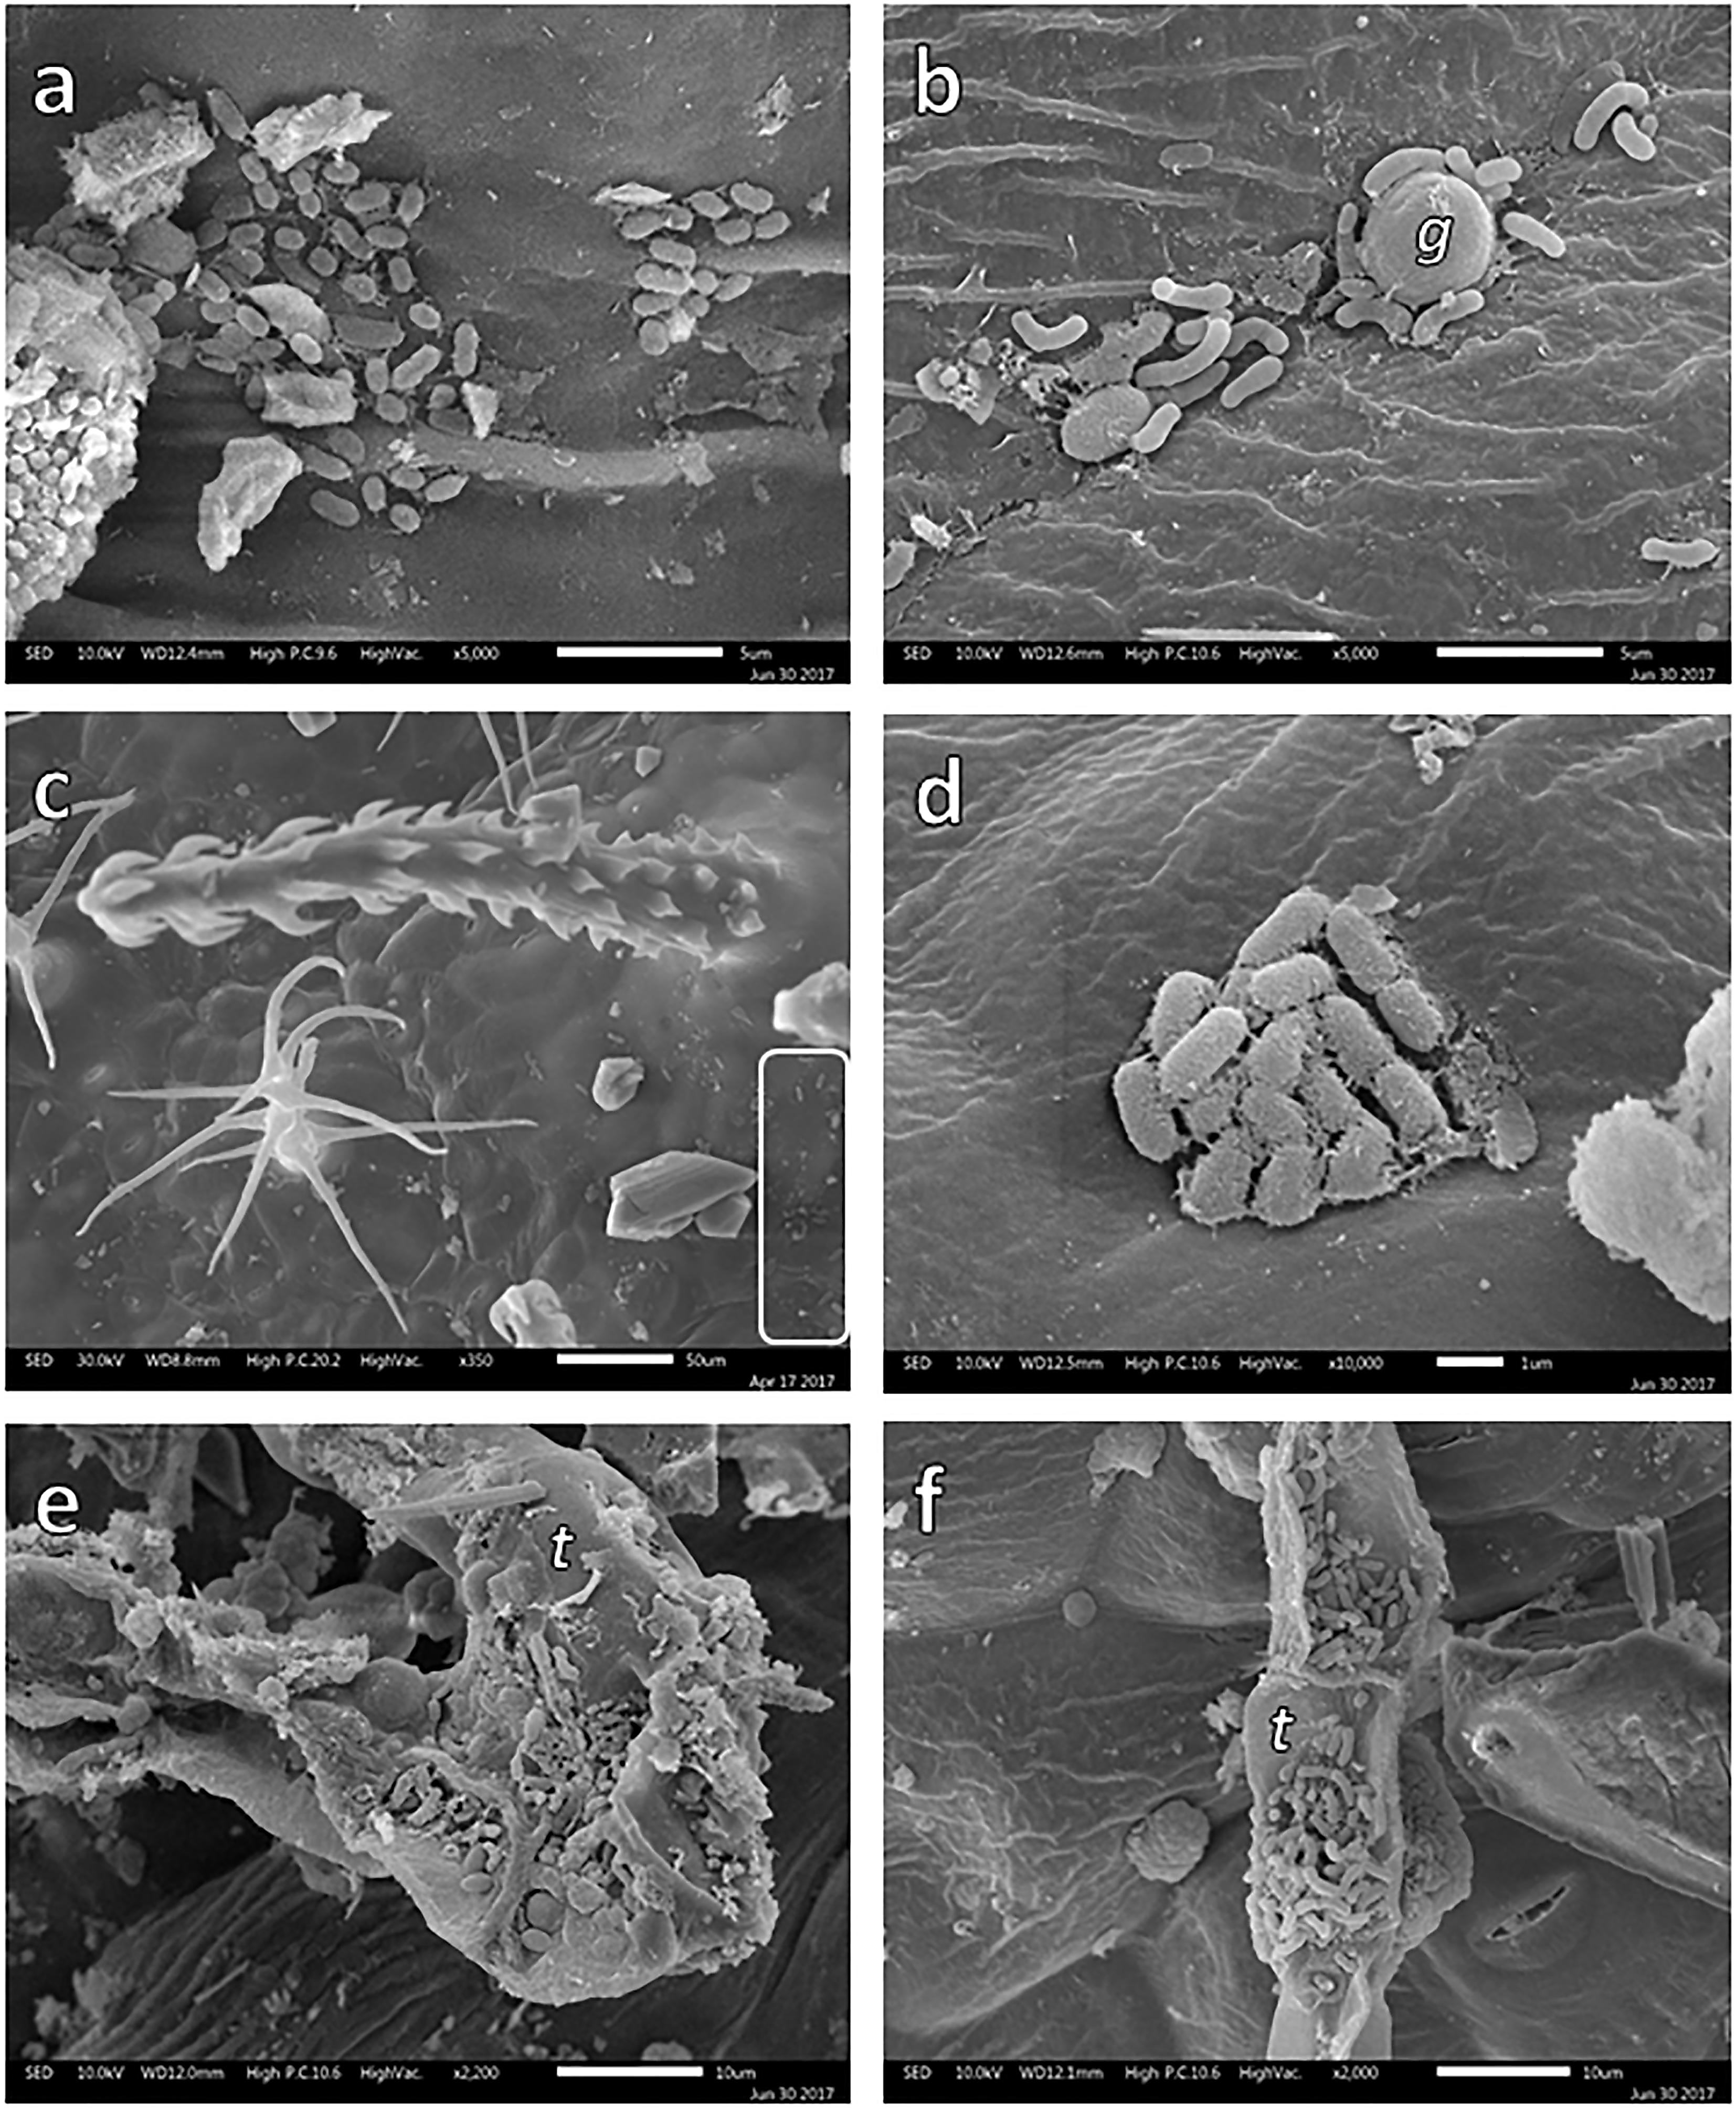 SEM images of bacterial colonies growing on the leaf surface of Brickellia veronicifolia (a,b), Gnaphalium sp. (c,d), and Flaveria trinervia (e,f) colonizing mine residues. CREDIT: Sánchez-López AS, et al. Leaf epiphytic bacteria of plants colonizing mine residues: Possible exploitation for remediation of air pollutants. Front Microbiol 9: 3028 (2018). doi: 10.3389/fmicb.2018.03028 (CC BY 4.0).